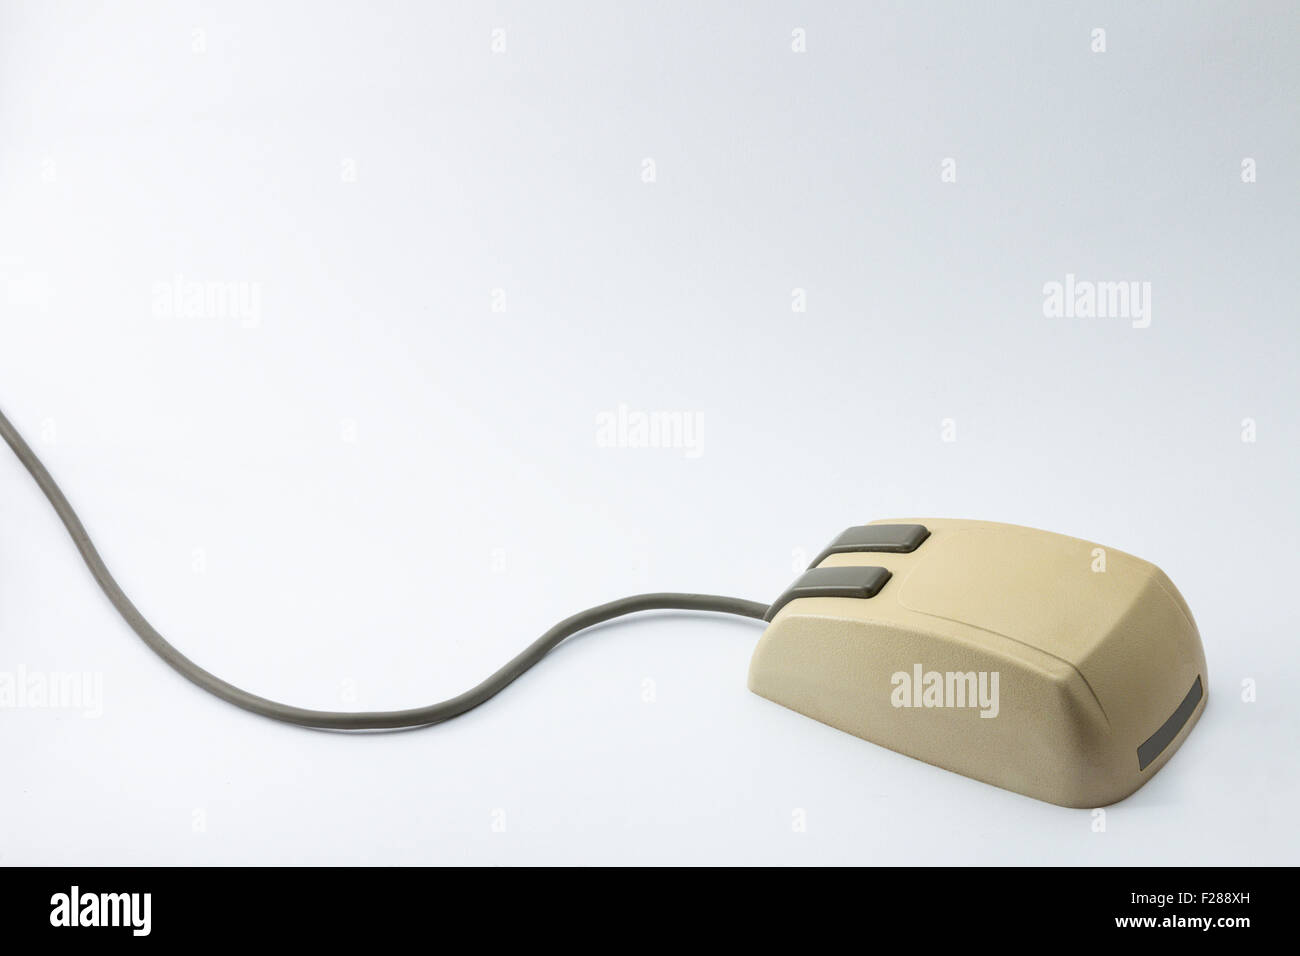 Obsolete, two-buttoned mouse, used in the 90's Stock Photo